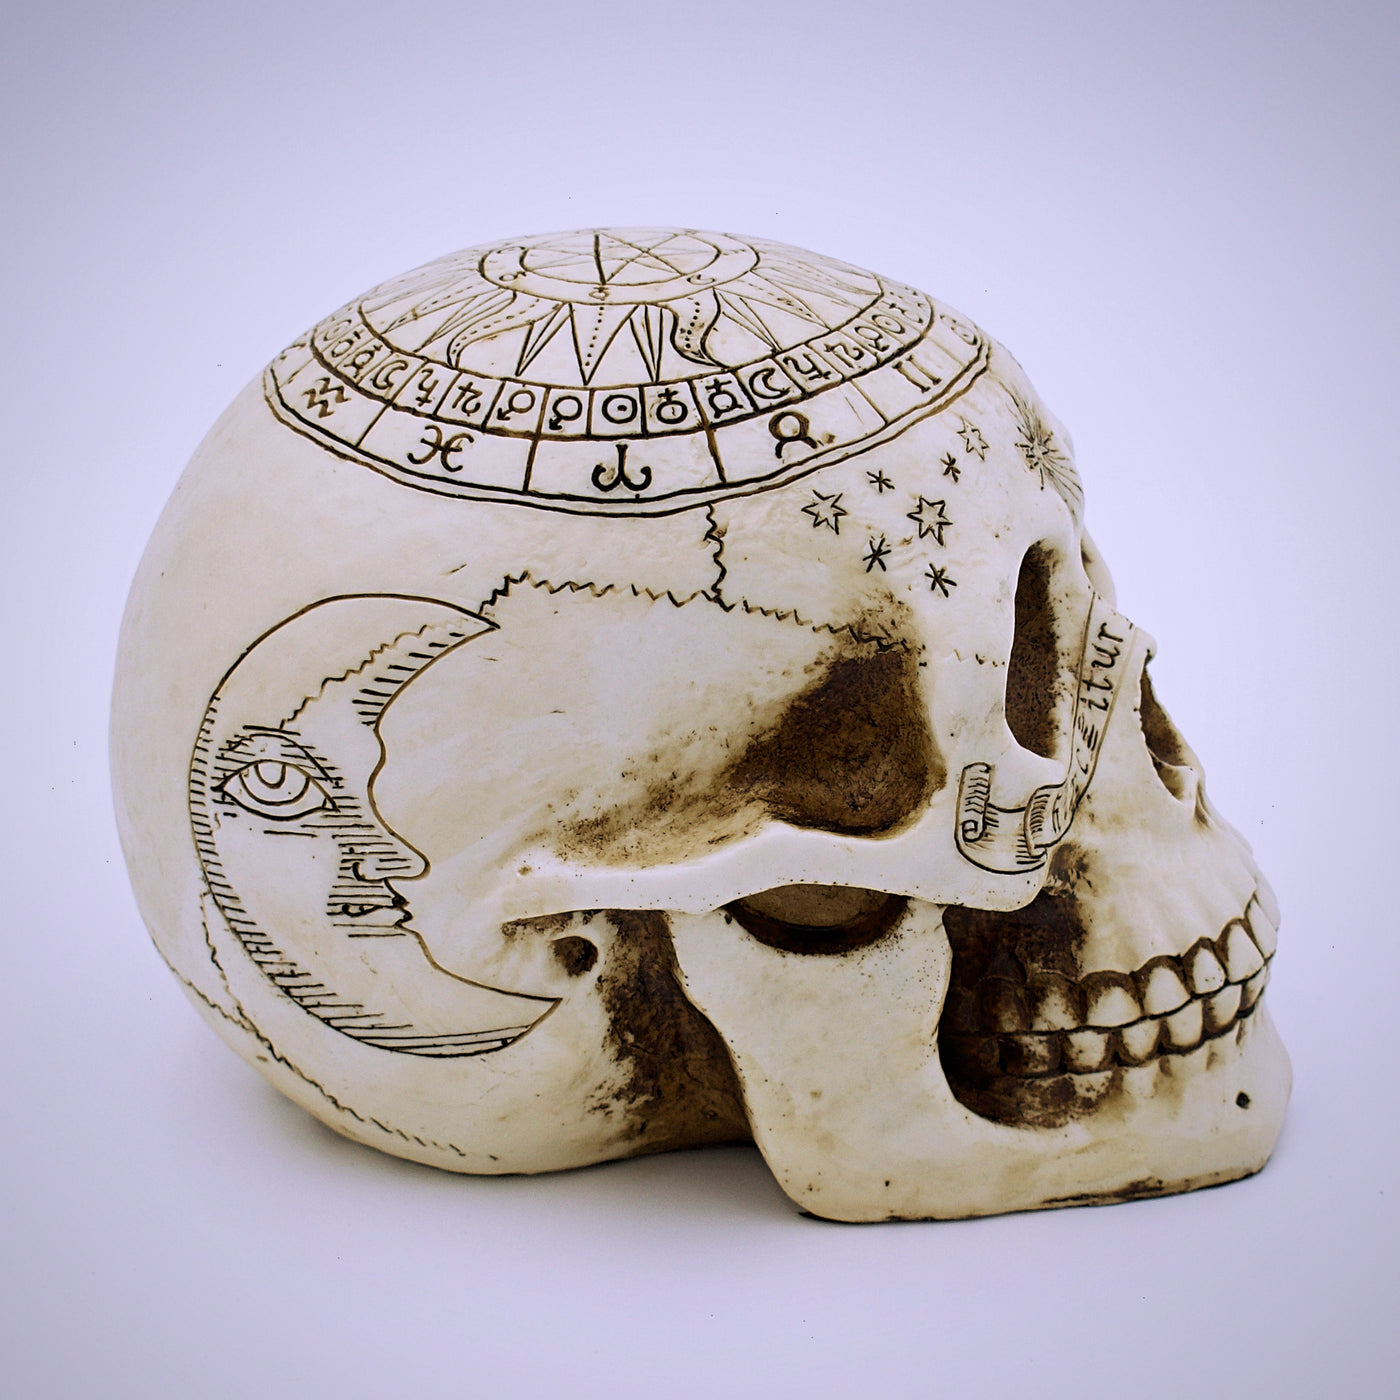 Astrological Design Skull Sculpture - The Cranio Collections